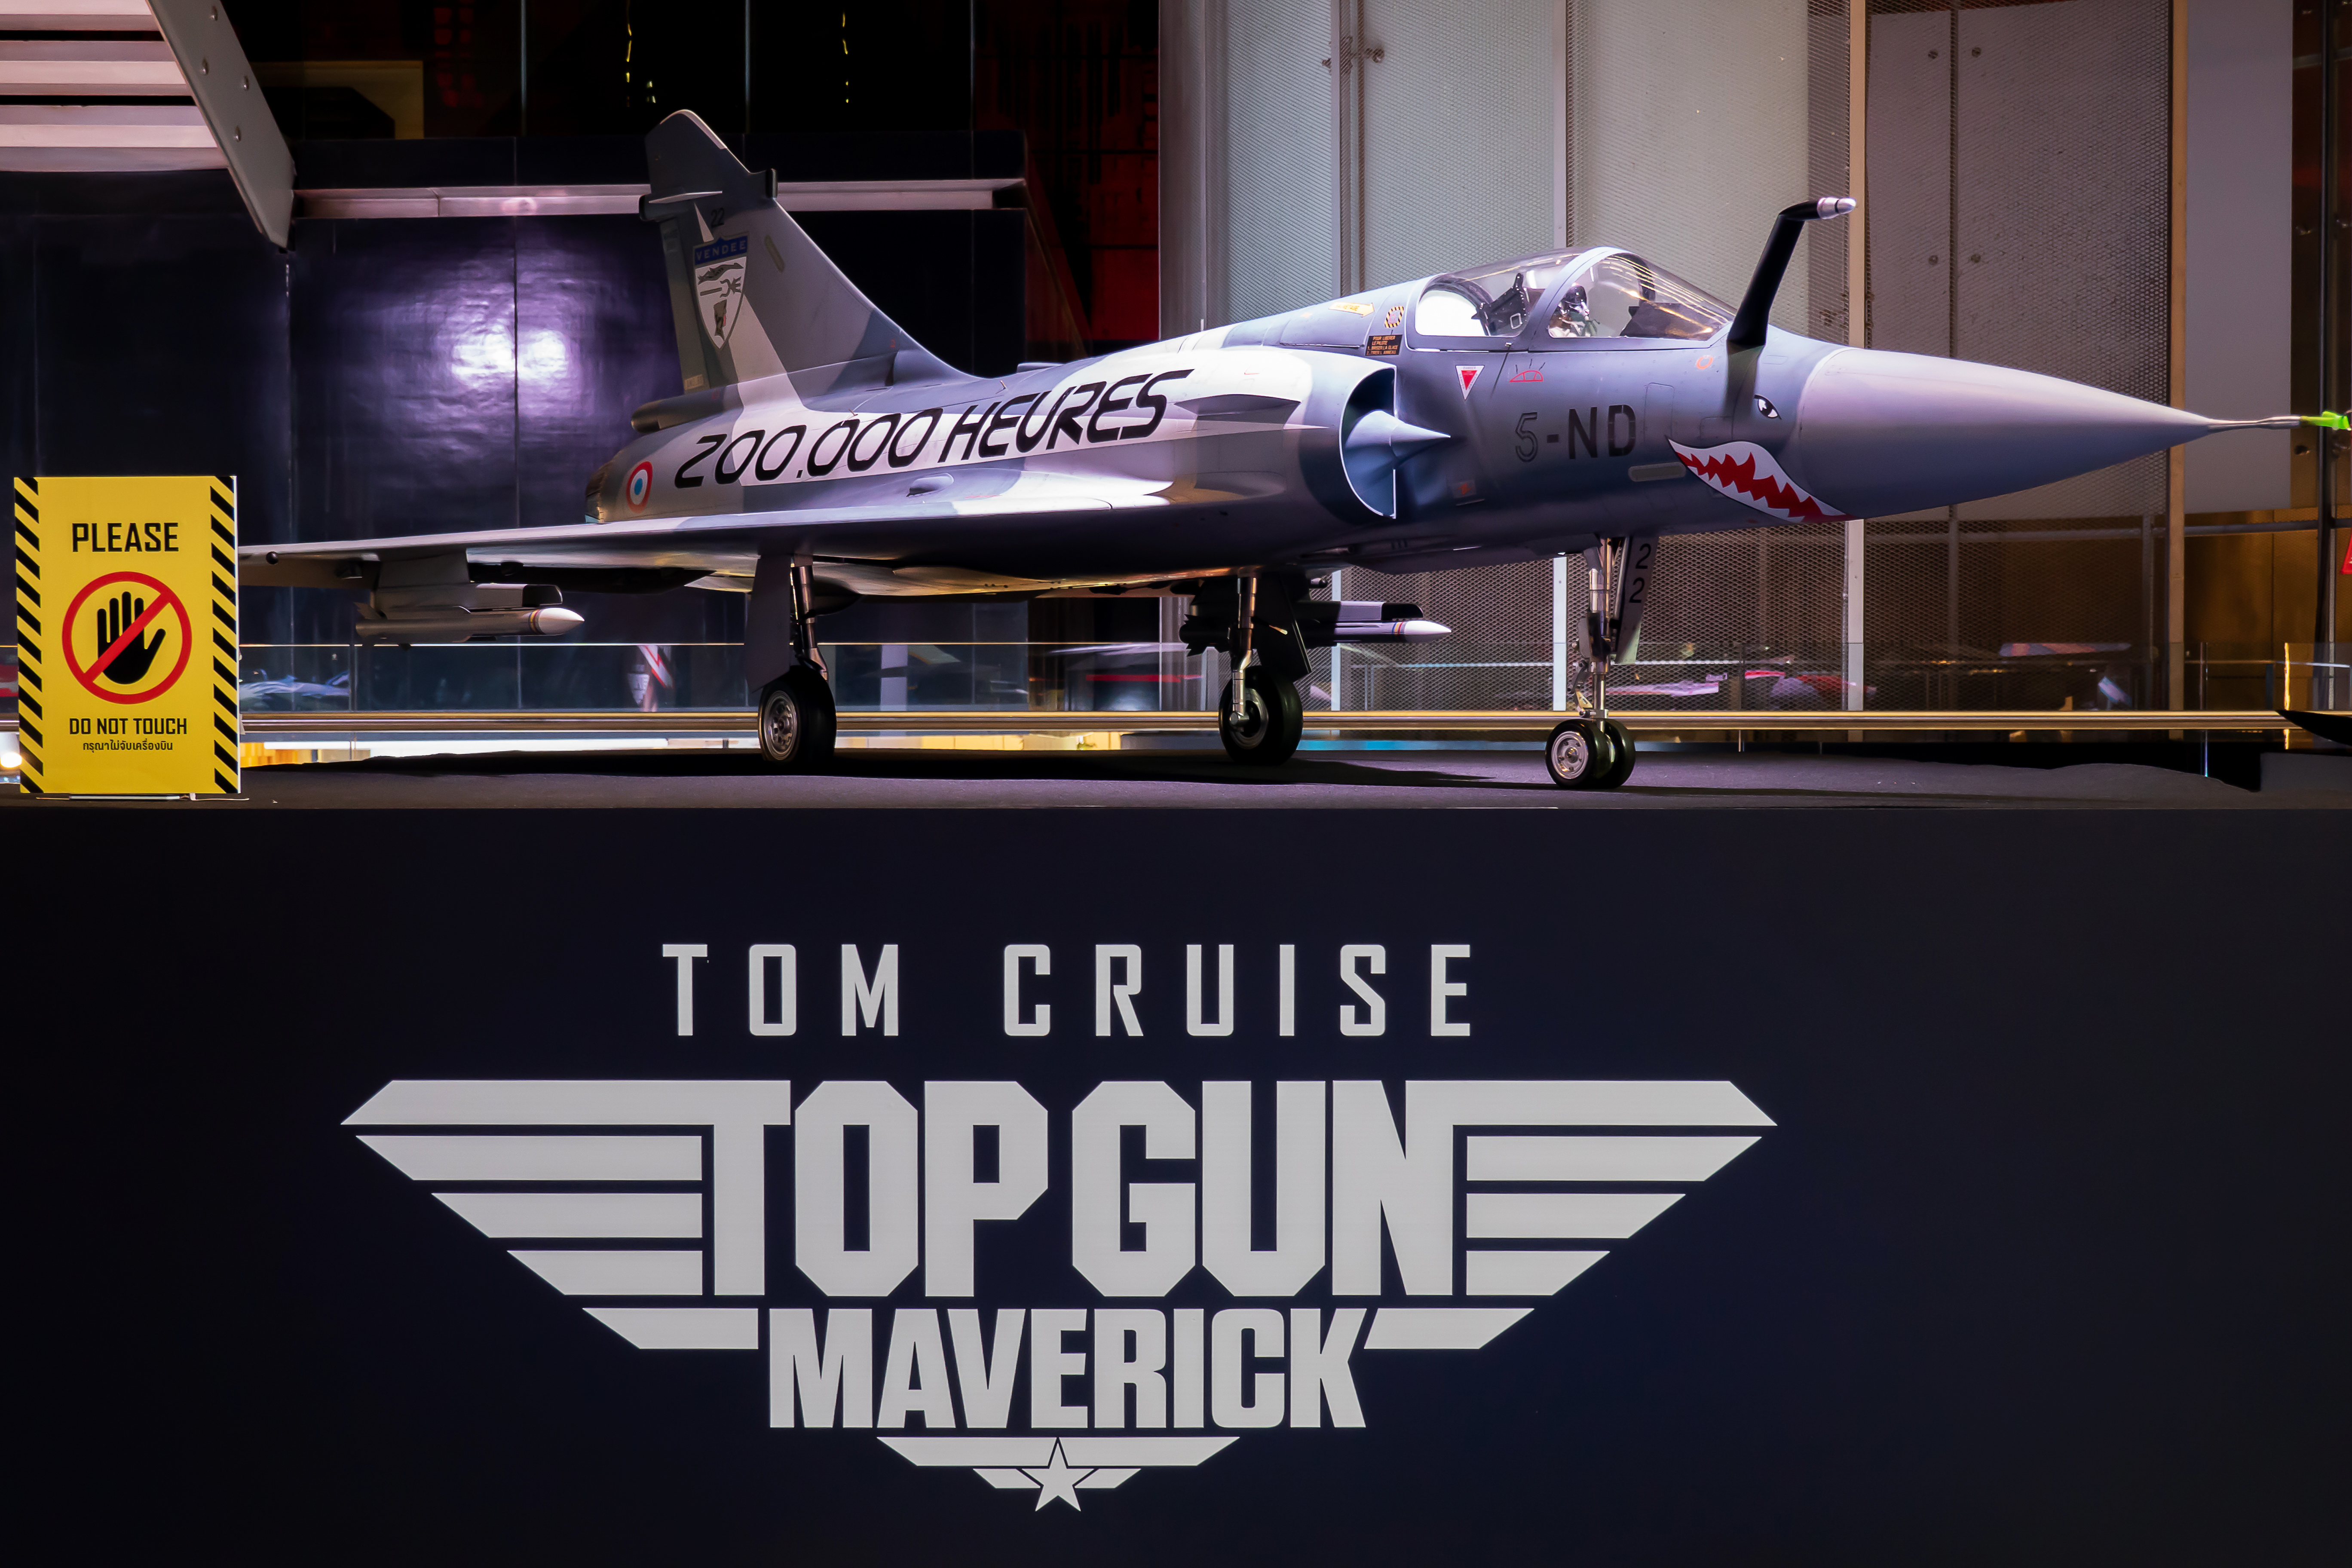 20 Top Gun: Maverick Facts - The High-Flying Sequel to the Iconic